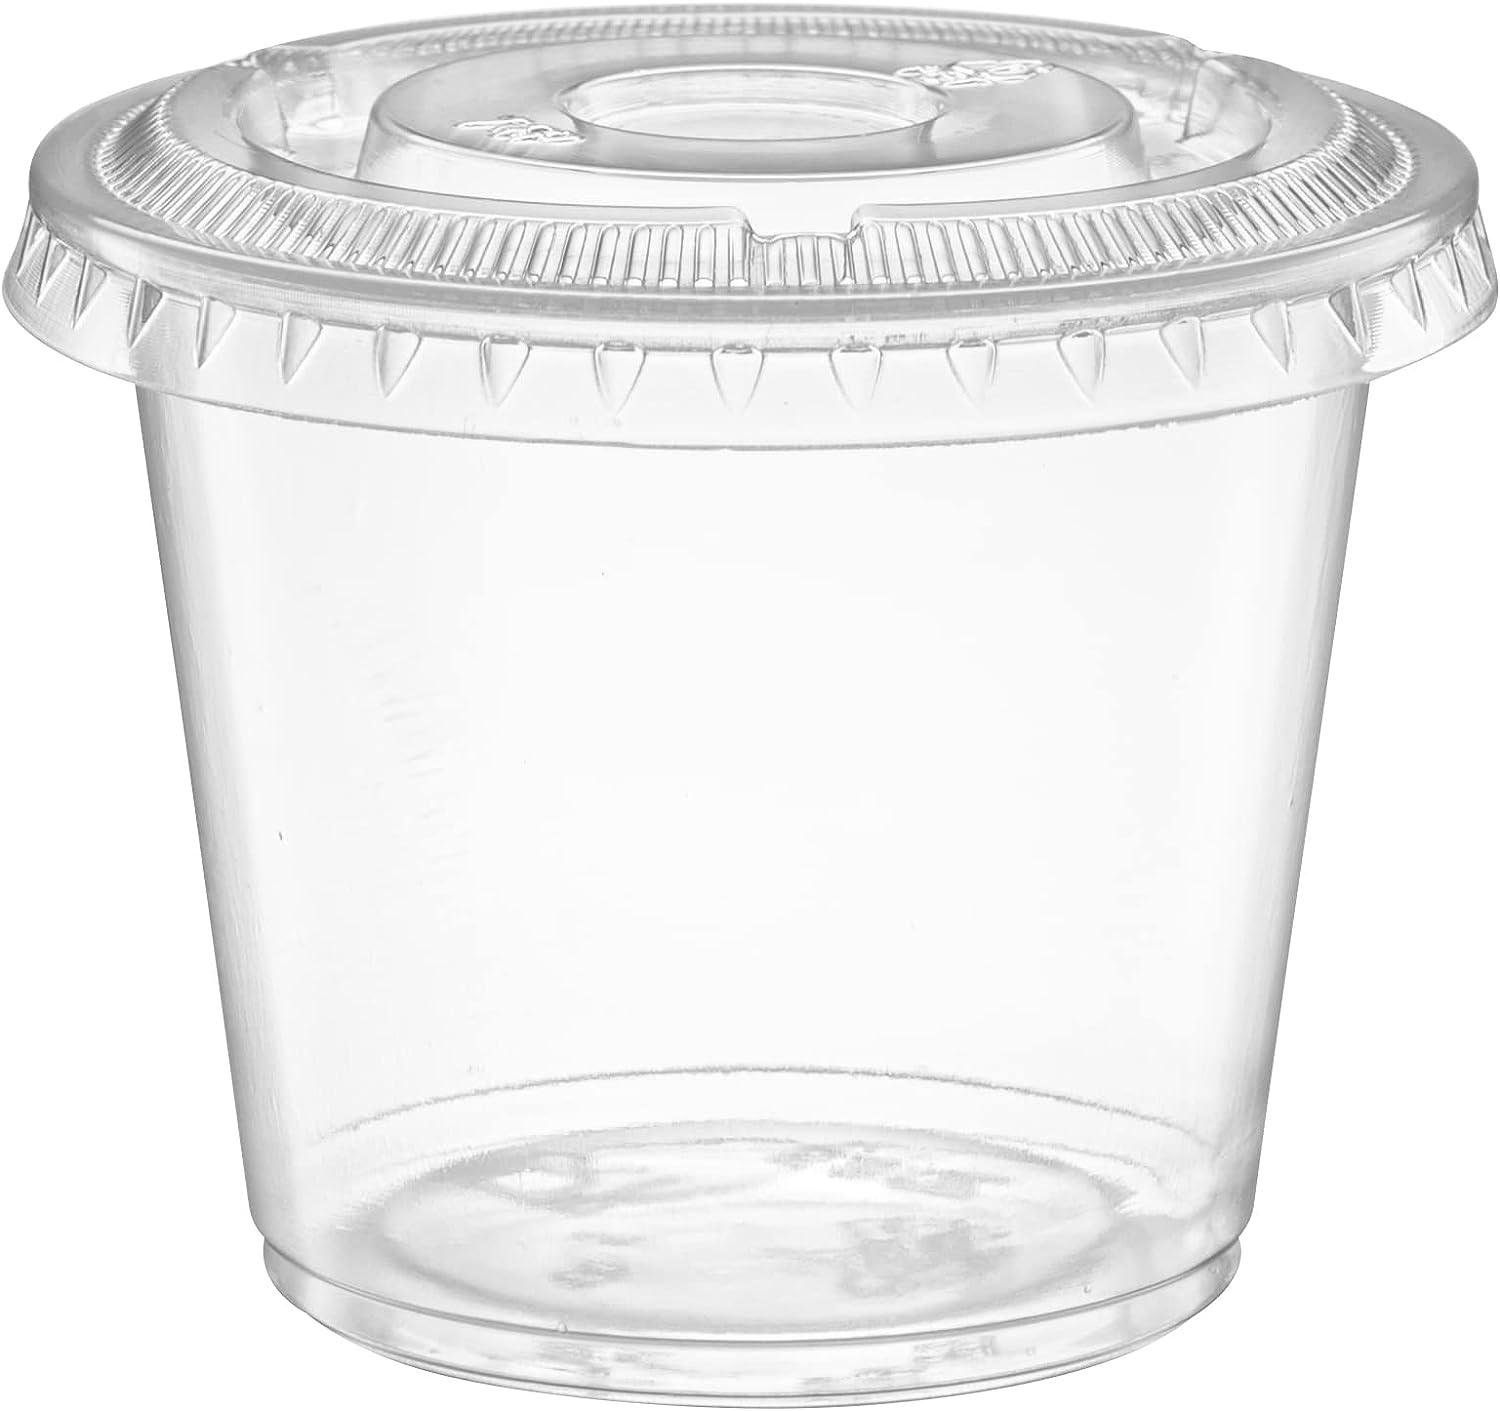 5 oz - 100 Sets} Clear Diposable Plastic Portion Cups With Lids, Small Mini  Containers For